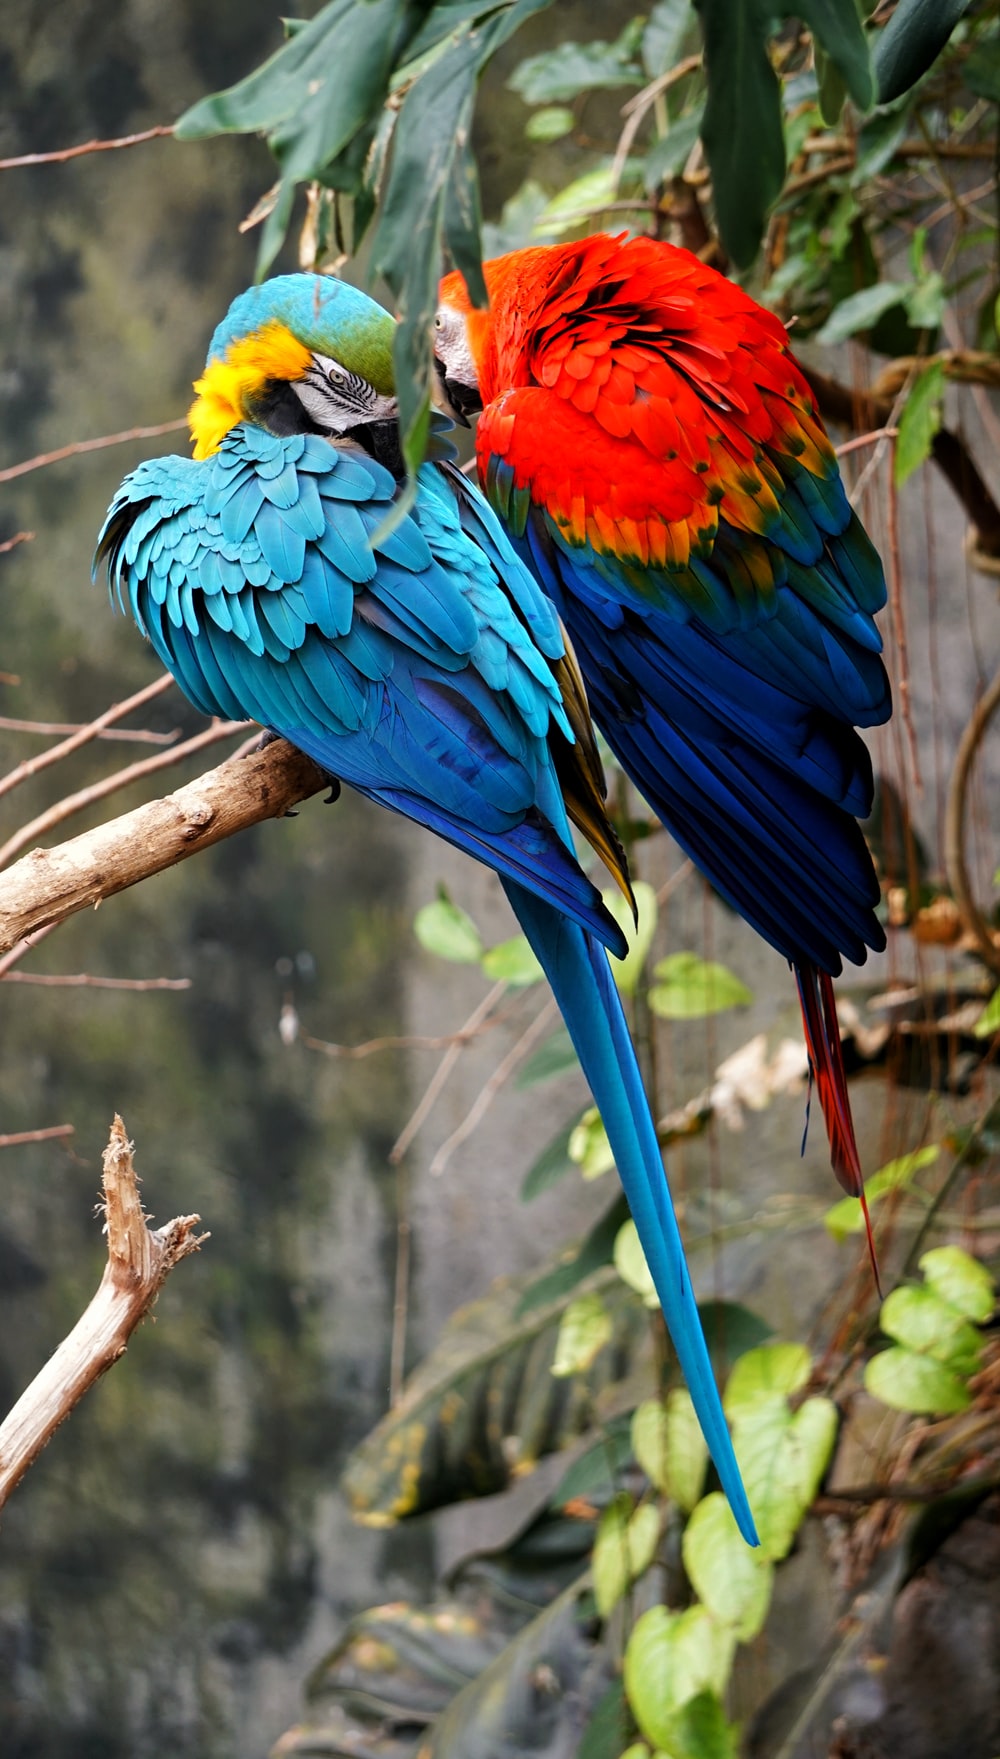 Red And Blue Parrots Sitting On Branch Photo Bird Image